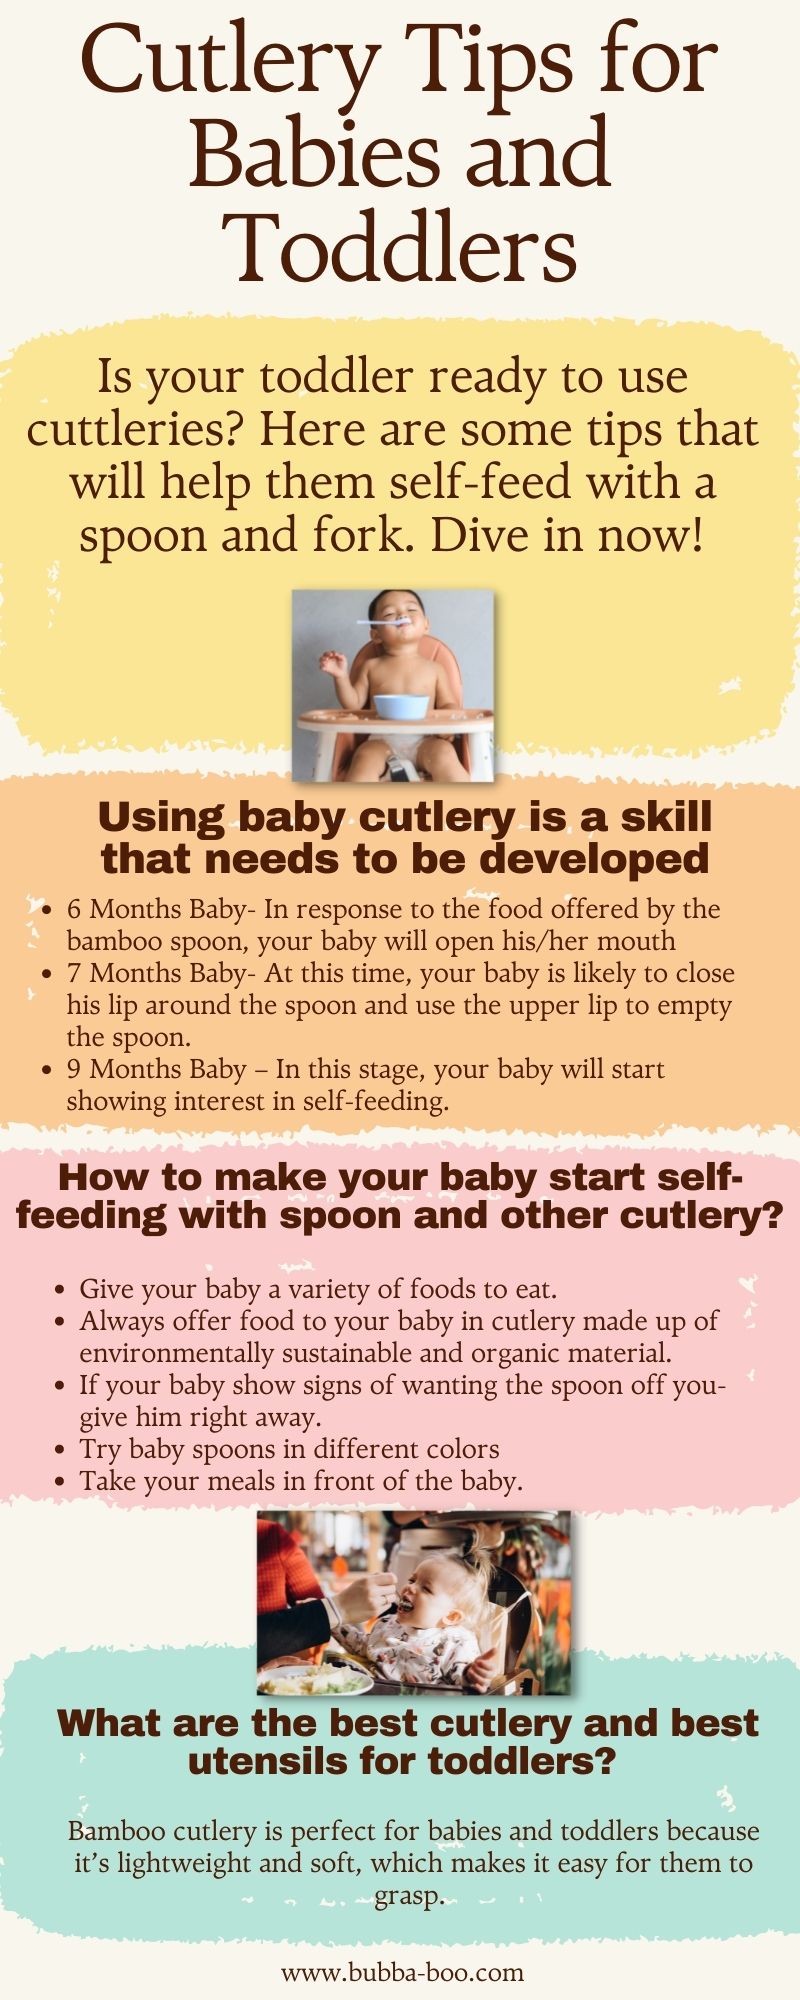 Cutlery Tips for Babies and Toddlers